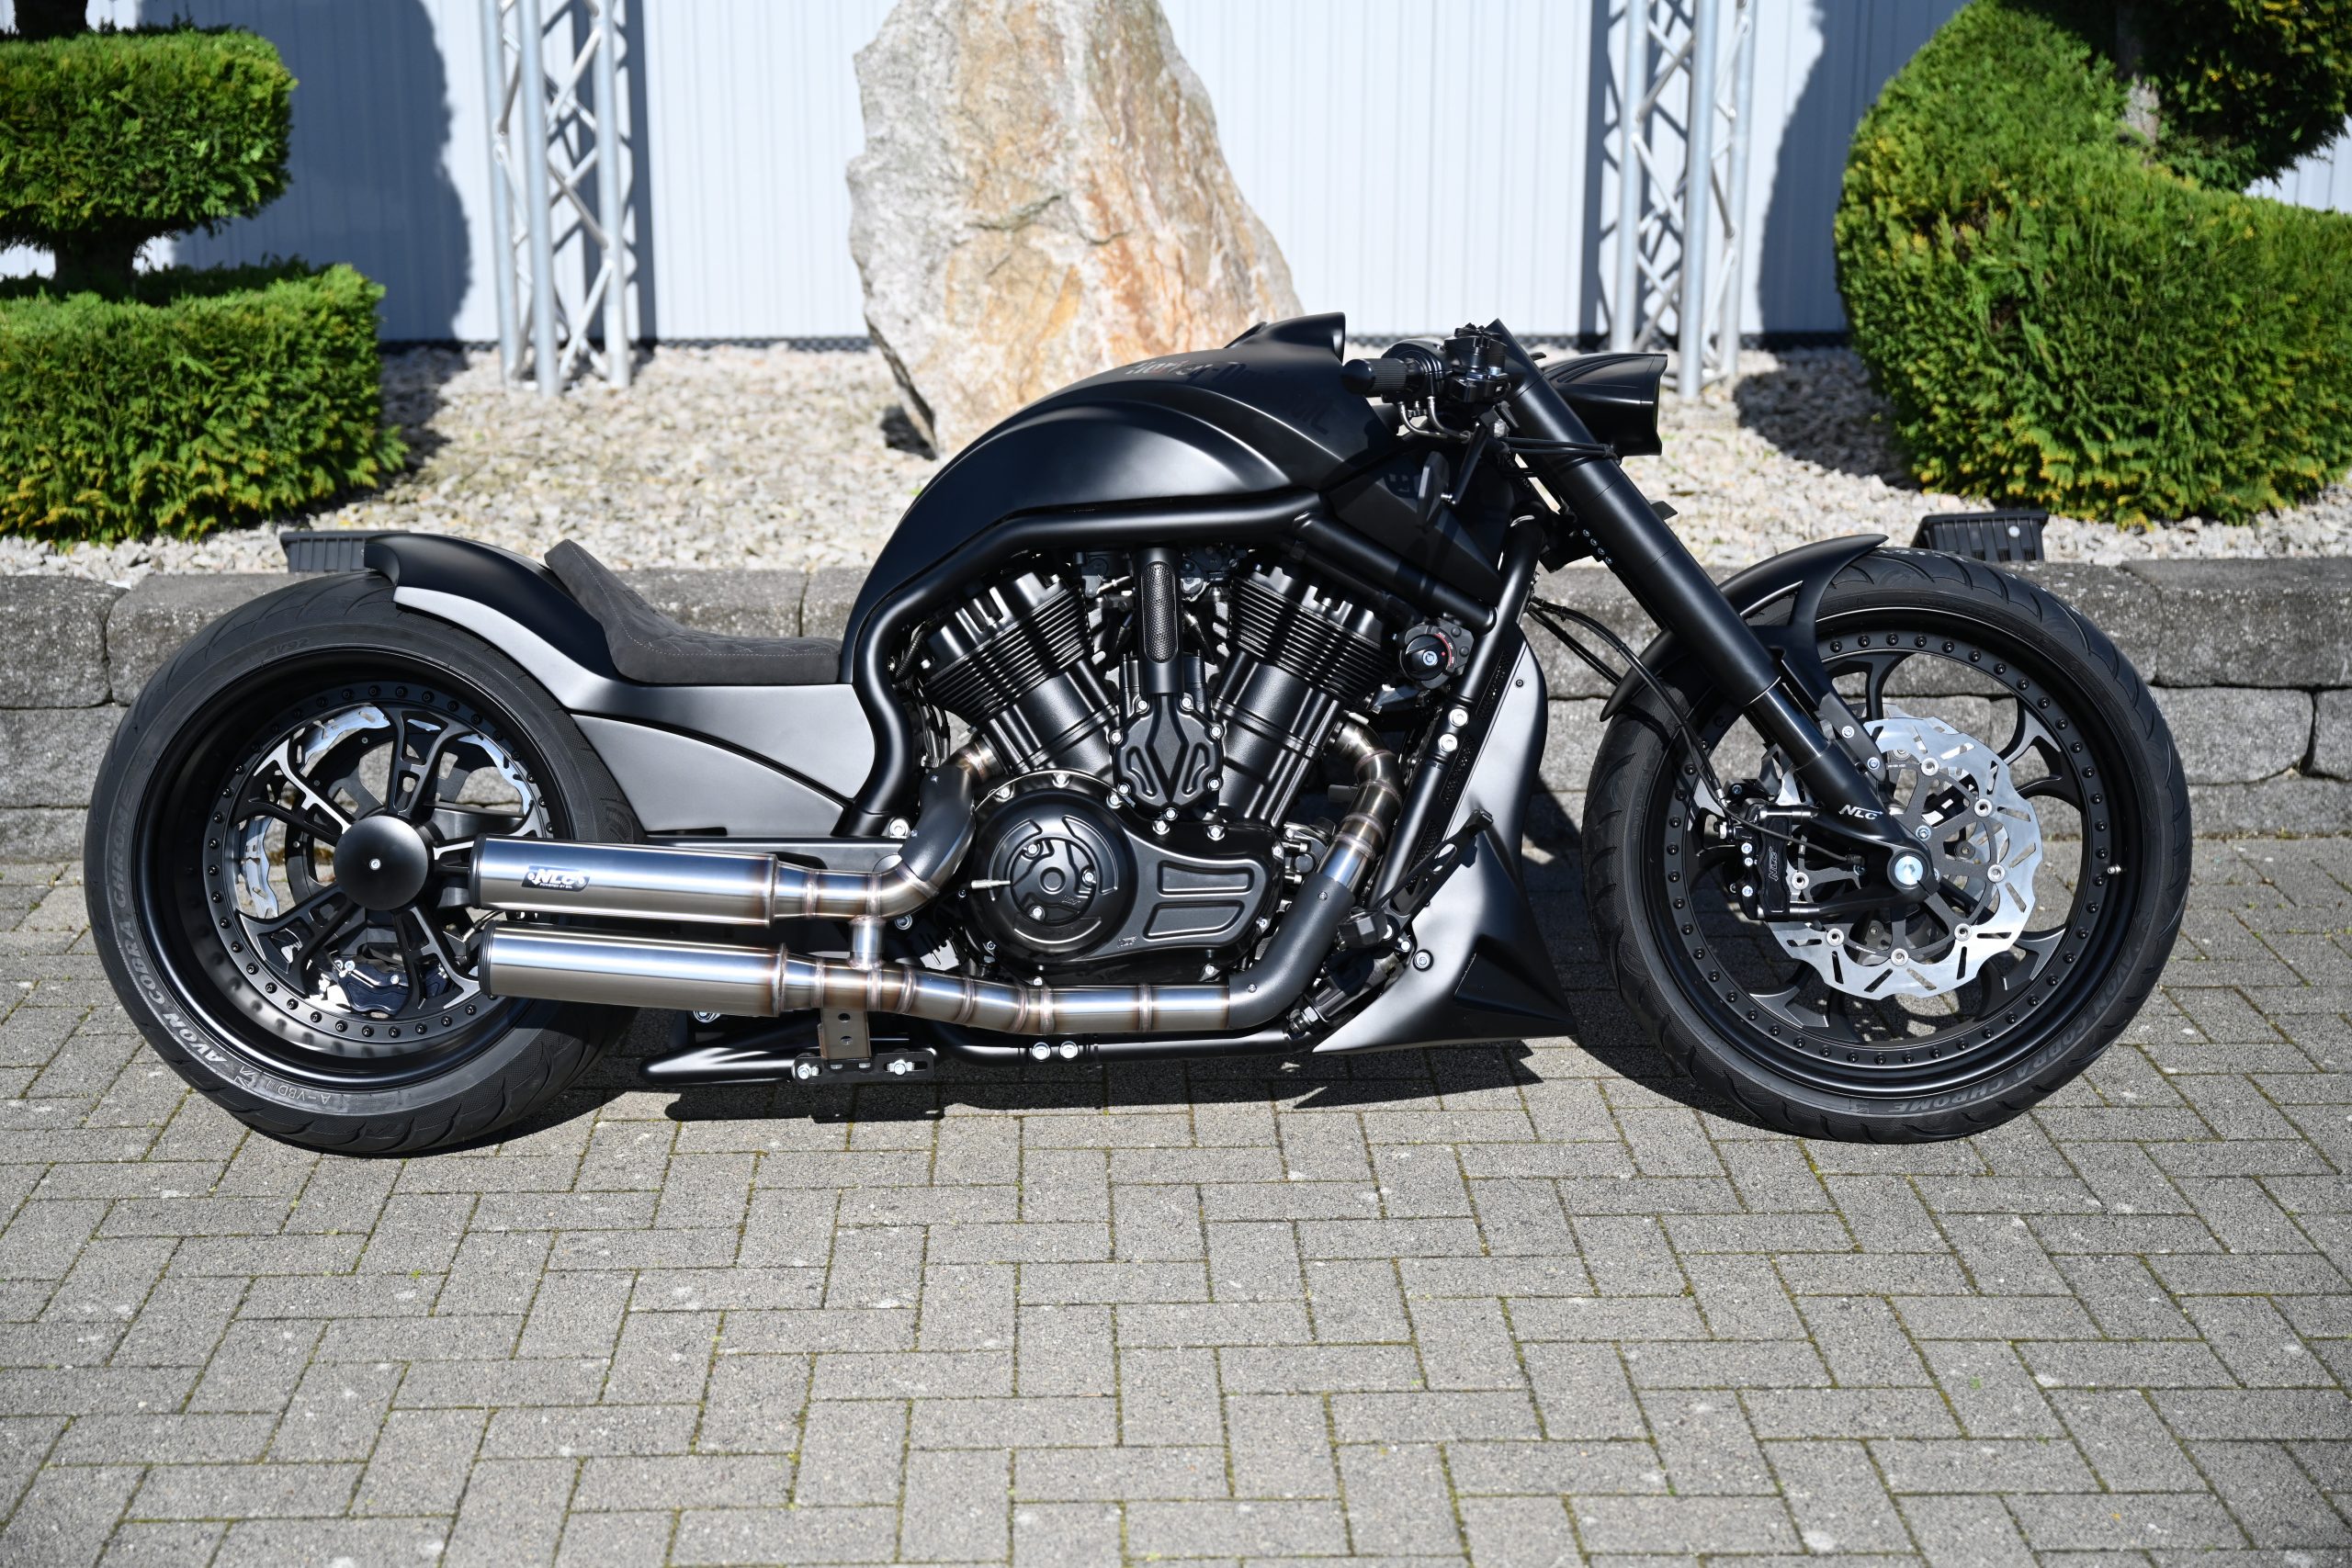 Exhaust System V-Rod "Low Exit" Stainless Steel Outline